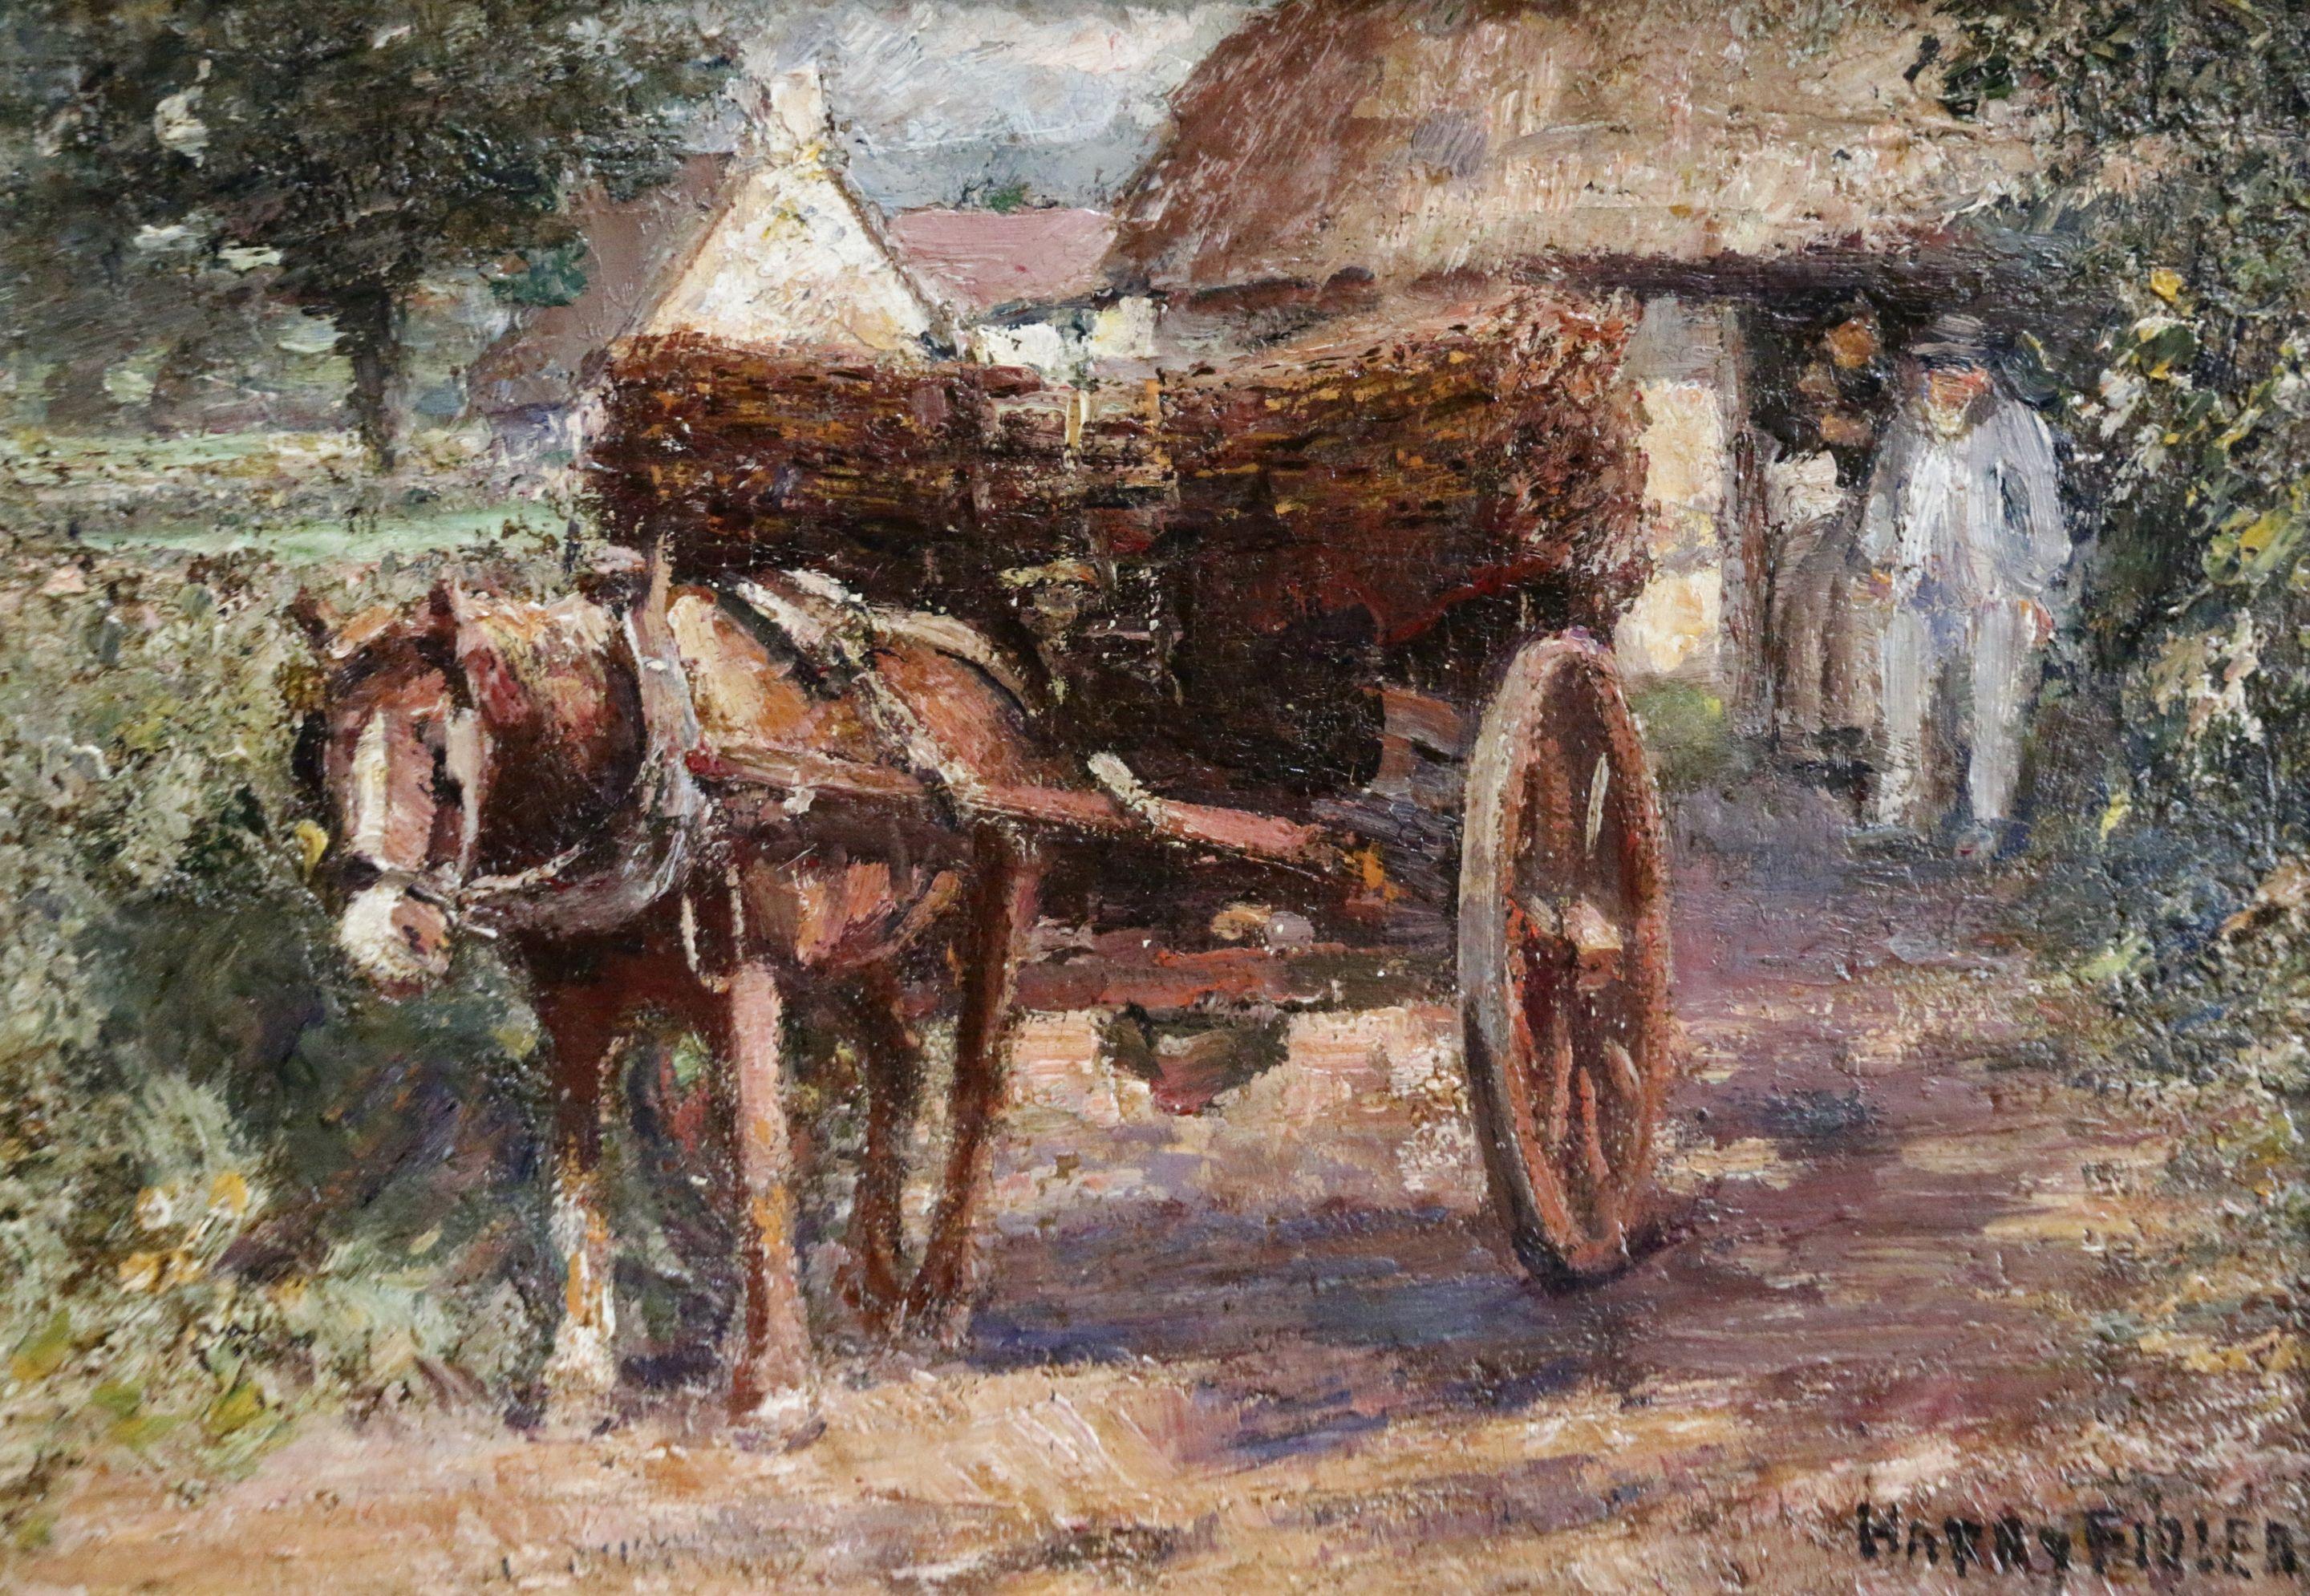 Oil on panel, circa 1900. Signed lower right. Framed dimensions are 18 inches high by 22 inches wide.

Born at Teffont in Wiltshire in 1856, Harry Fidler was a painter of genre and country scenes in oil.

Fidler painted in a highly distinctive